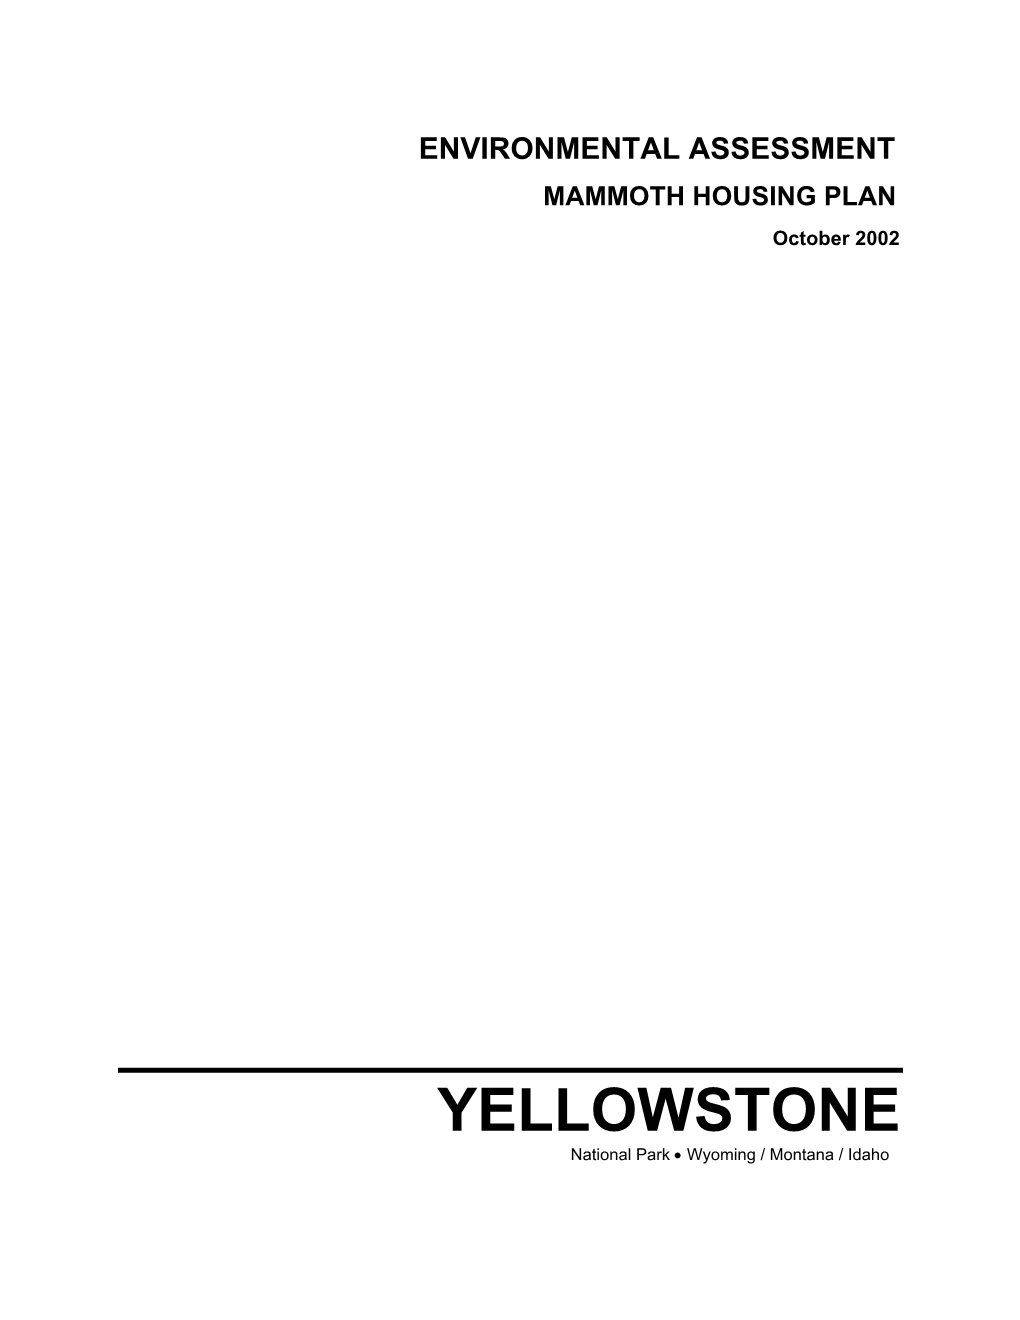 YELLOWSTONE National Park • Wyoming / Montana / Idaho 2 Note to Reviewers and Respondents